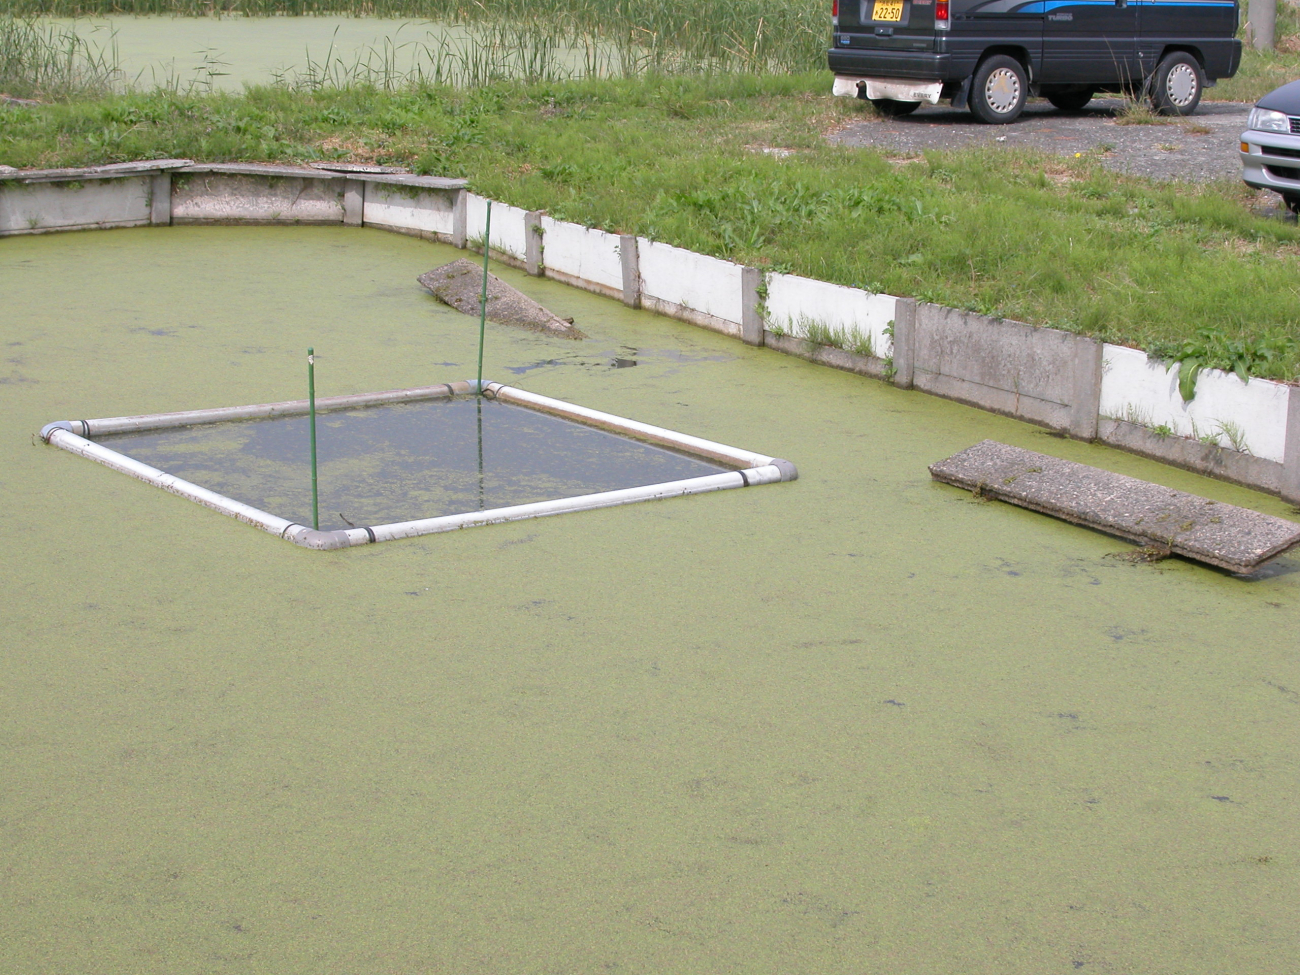 Algae covered ponds for growout of turtle at the Hattori-Nakamura soft-shelledturtle farm in Japan